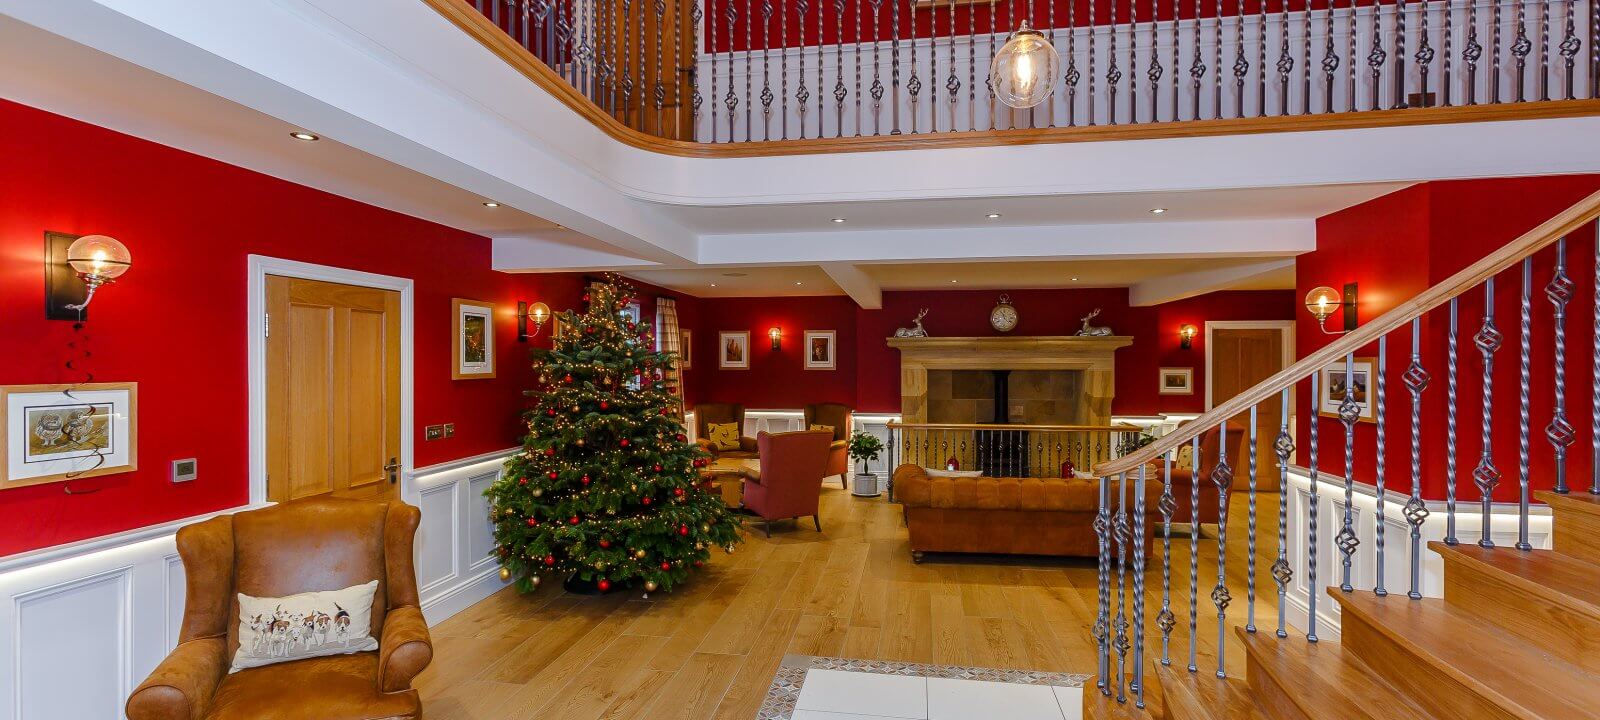 Christmas tree in hall showing staircase and landing